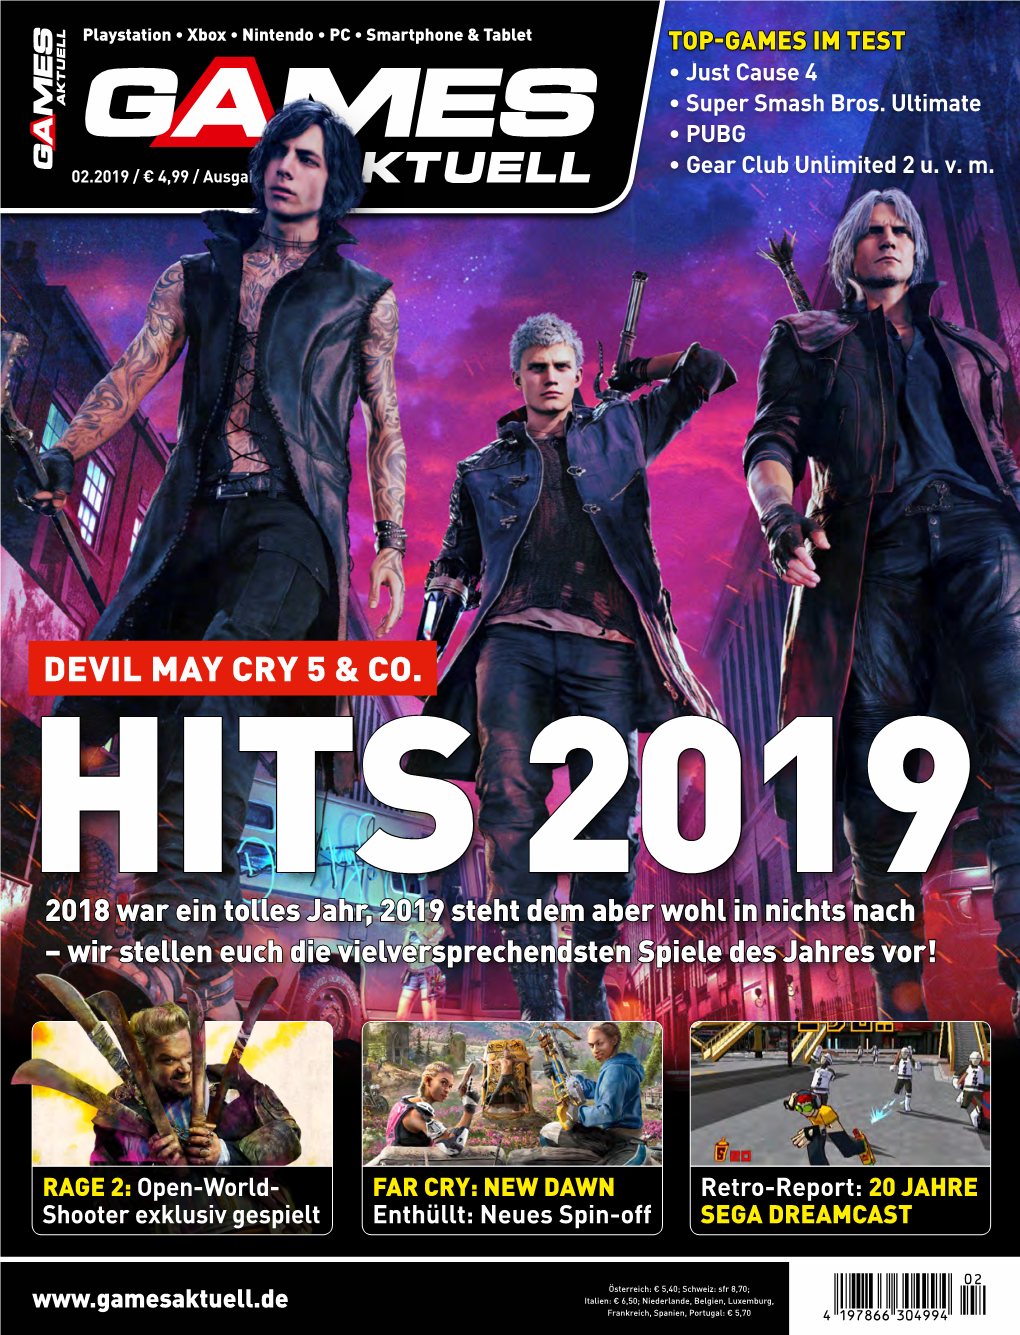 Devil May Cry 5 &